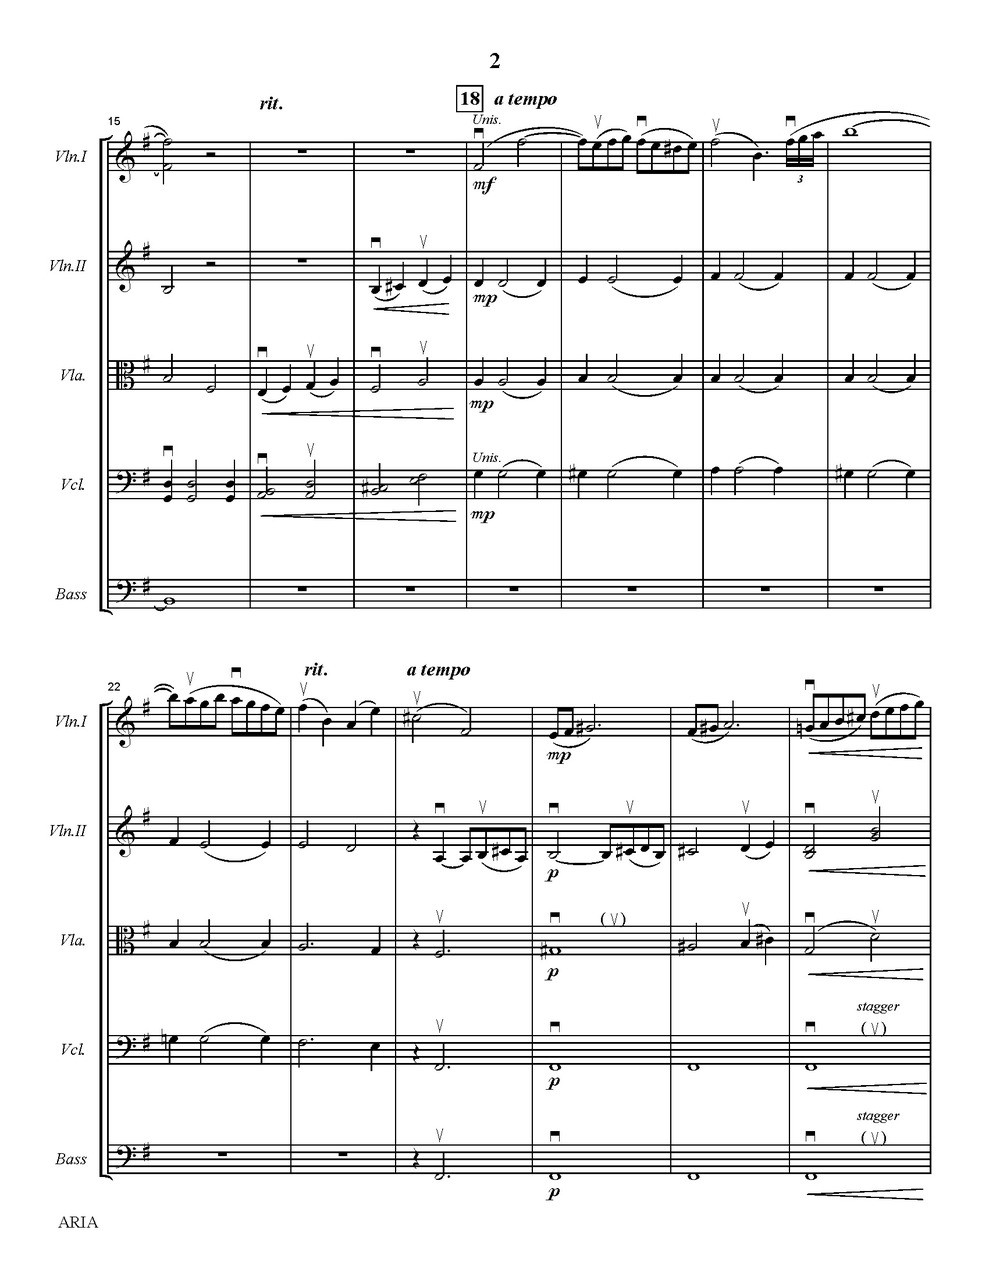 Aria for String Orchestra - C. Alan Publications